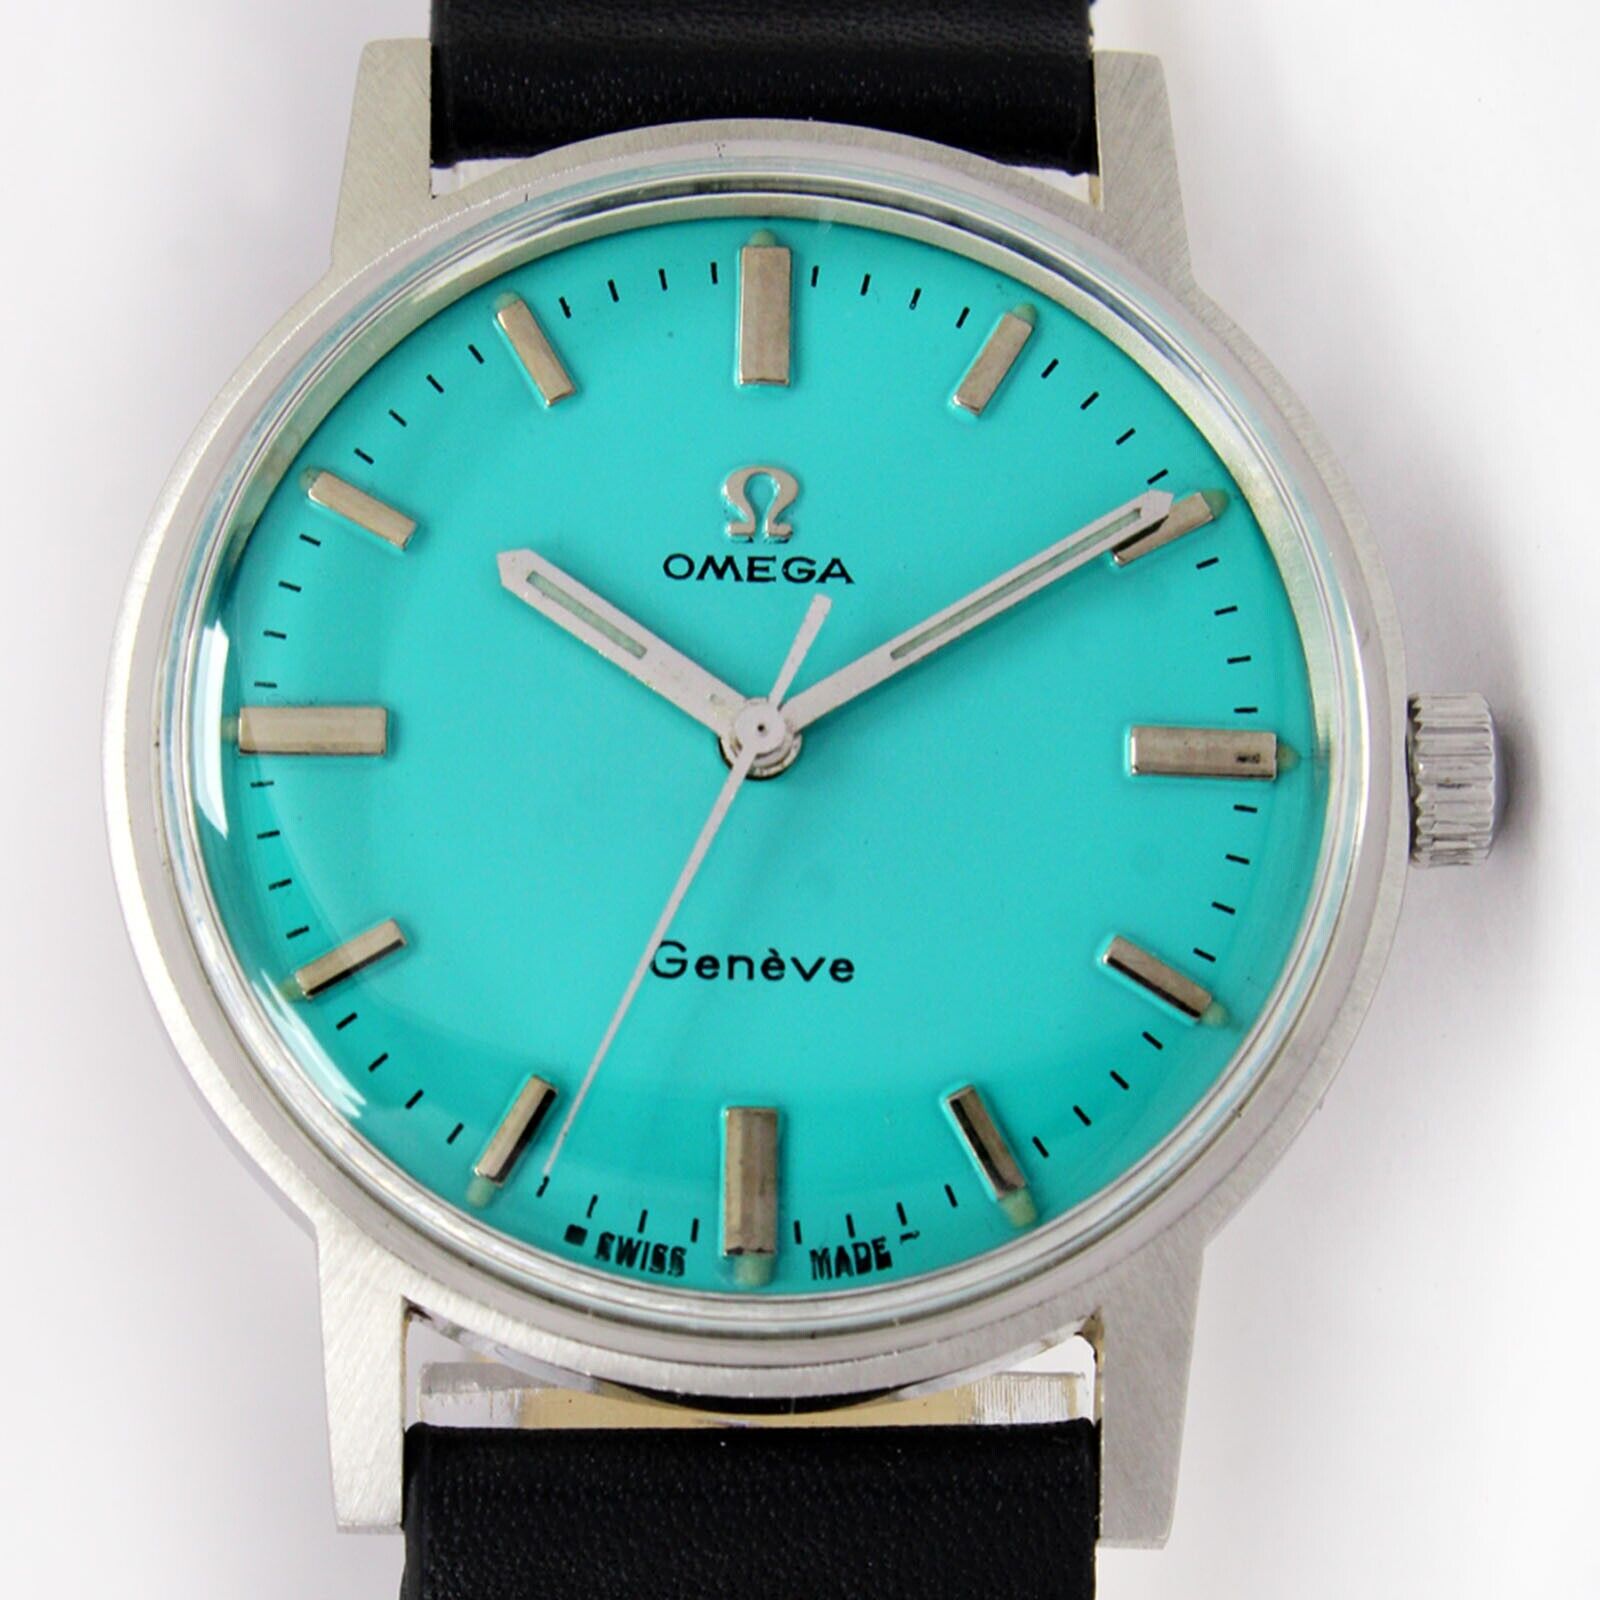 1969 Omega Geneve Winding Turquoise Mens Vintage Watch 135.070 New Year Deal